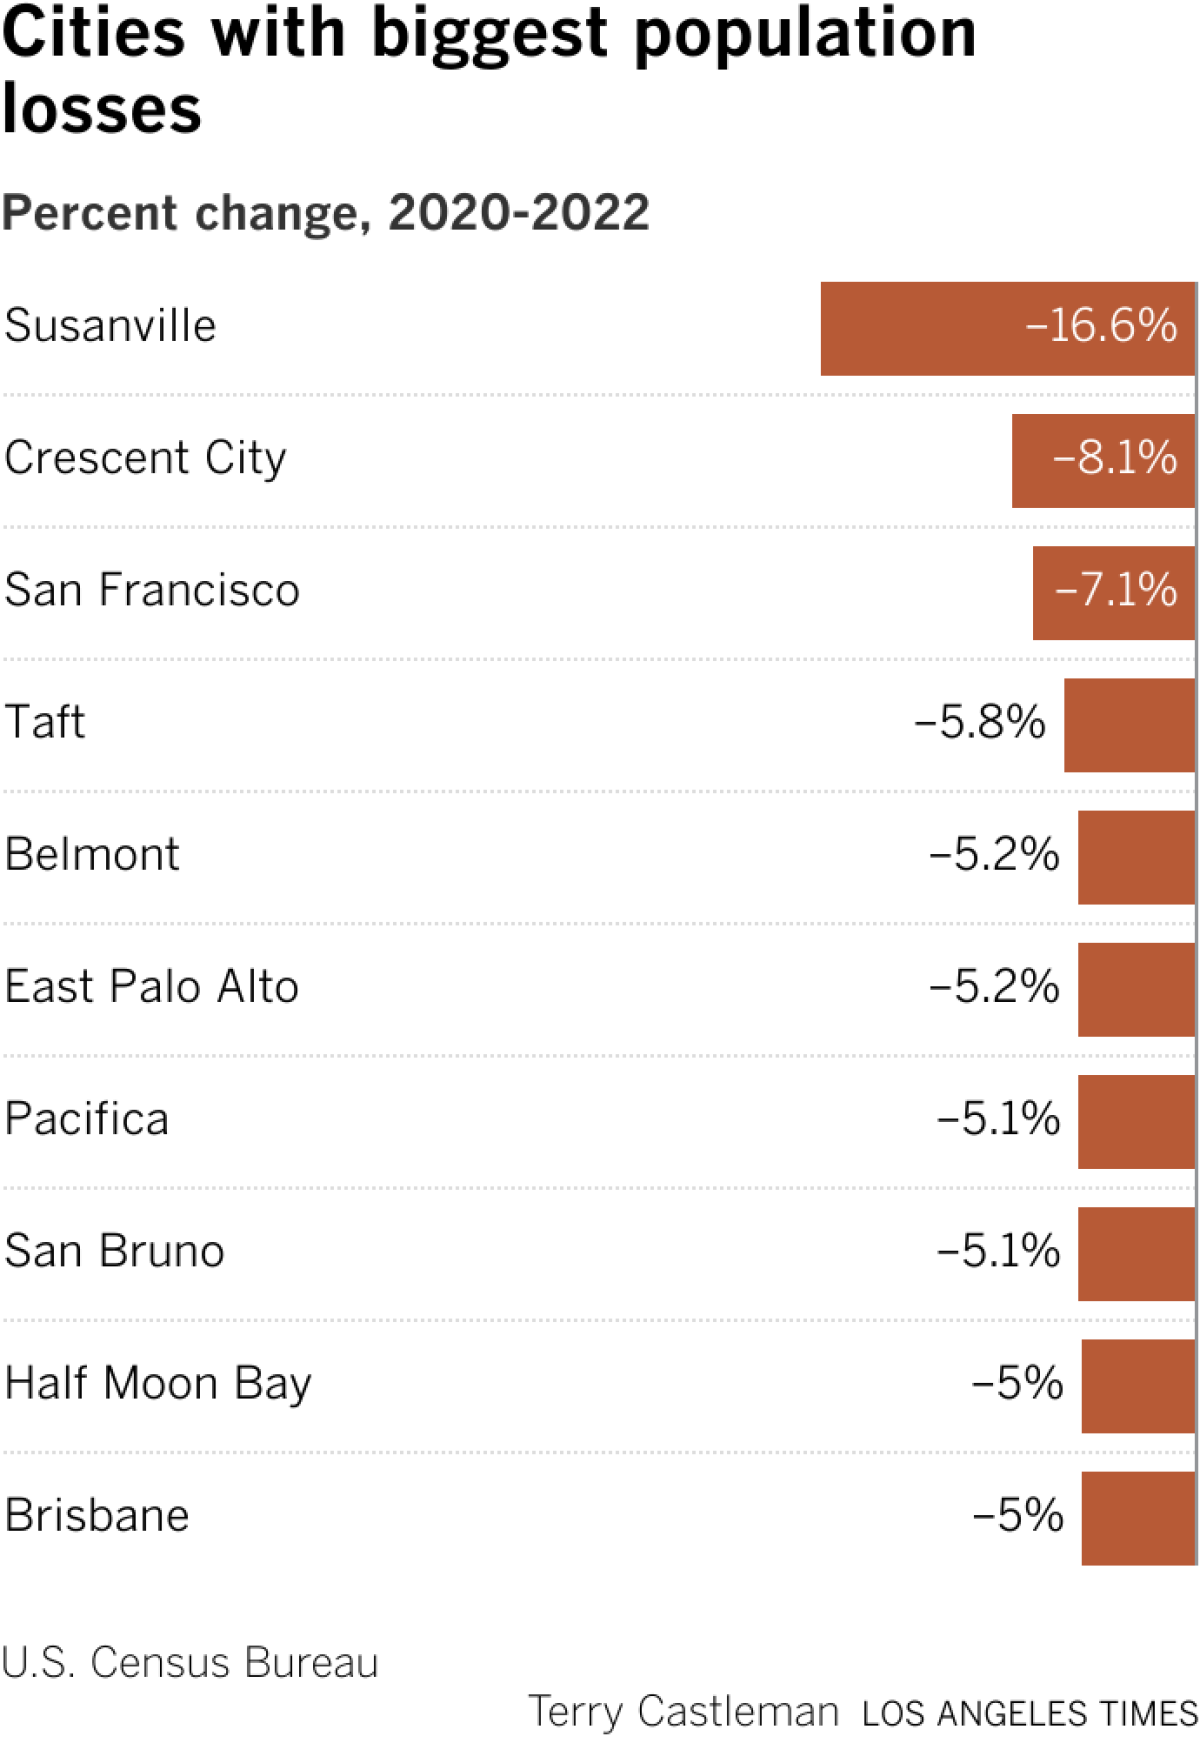 Bar chart showing the 10 California cities whose populations shrank the most between July 2020 and July 2022